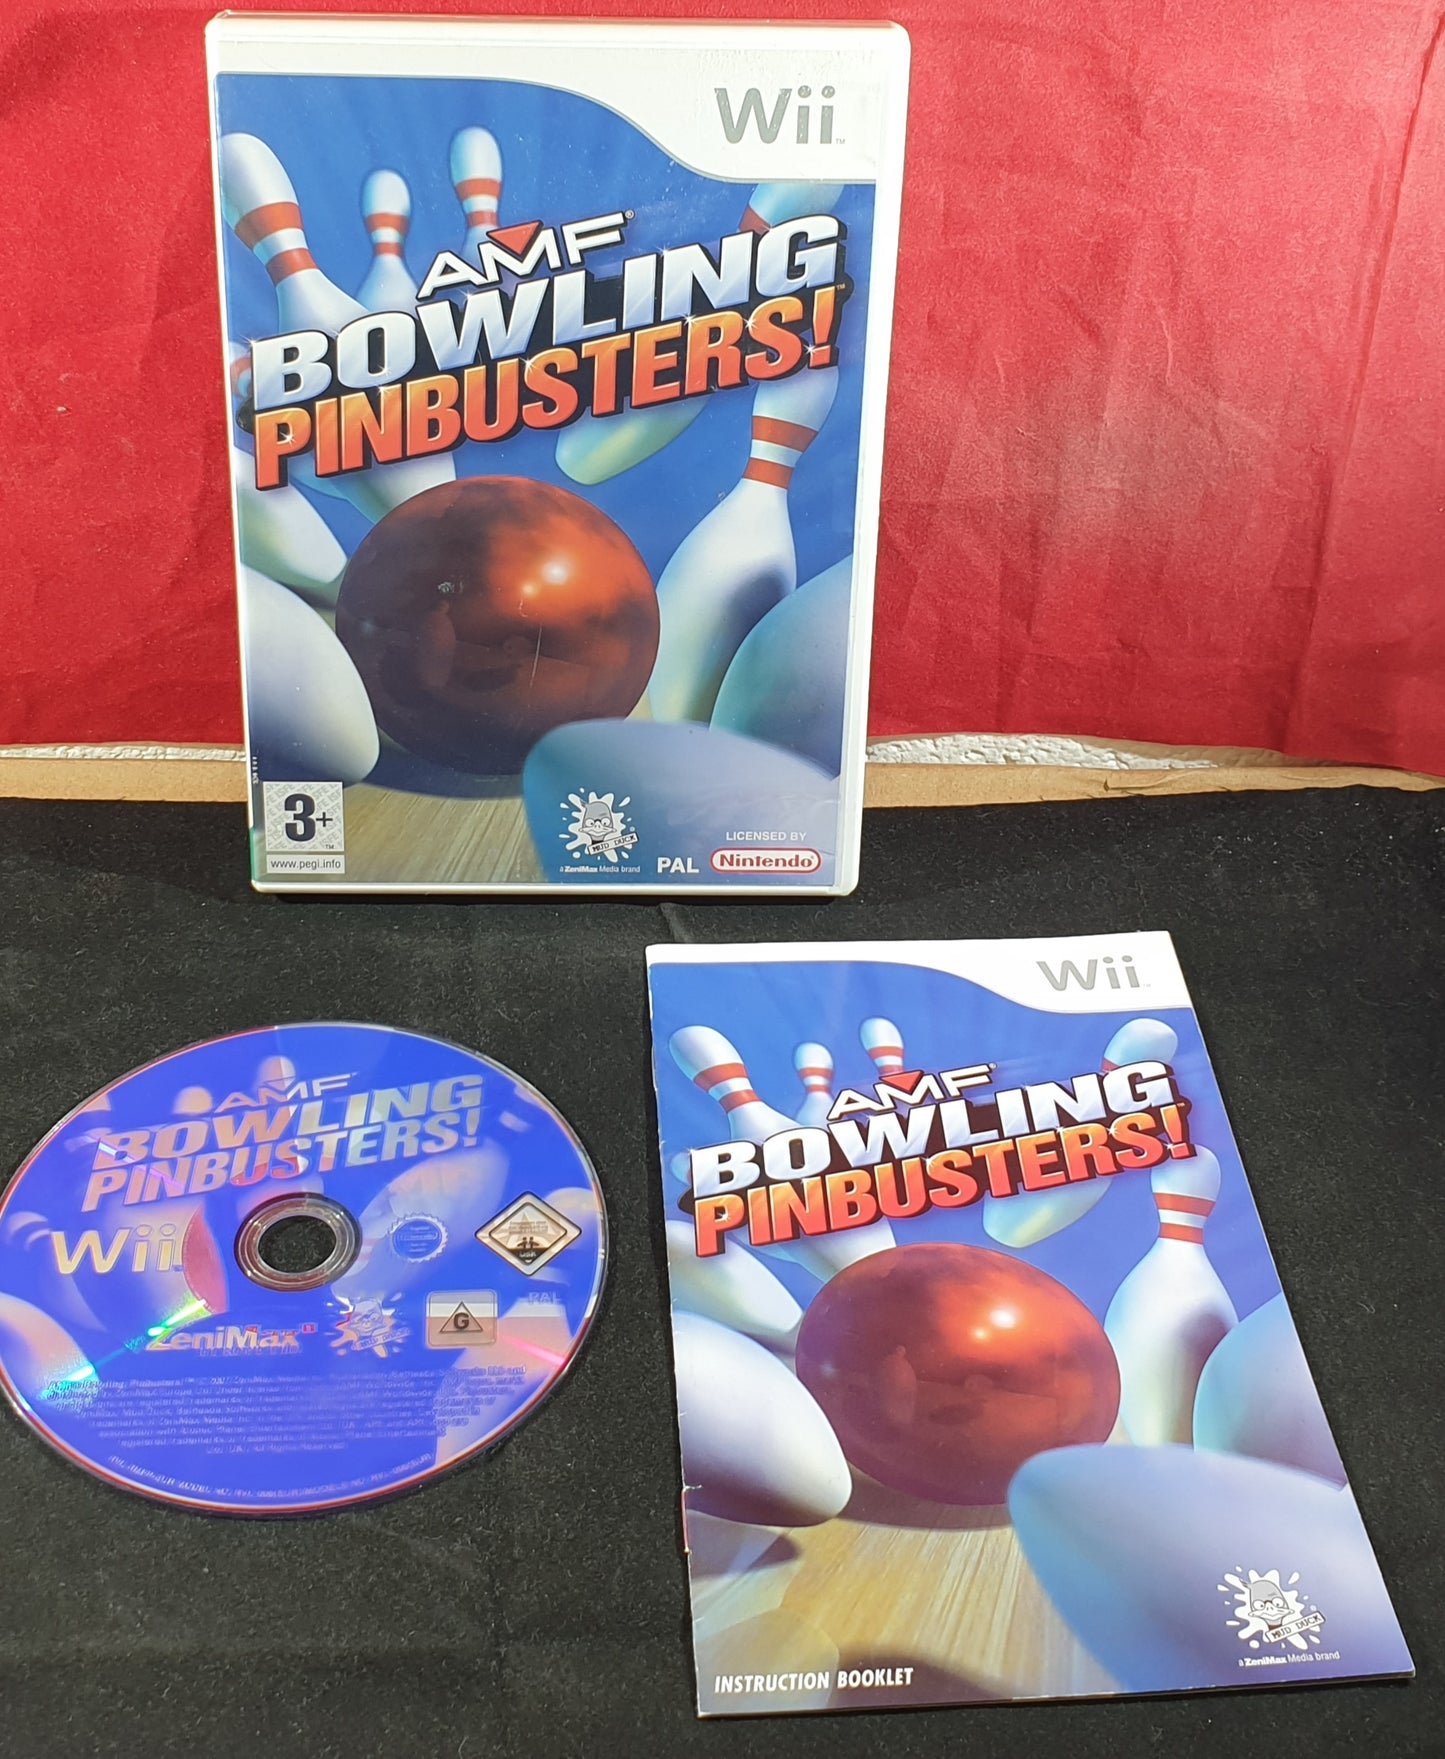 AMF Bowling Pinbusters Nintendo Wii Game